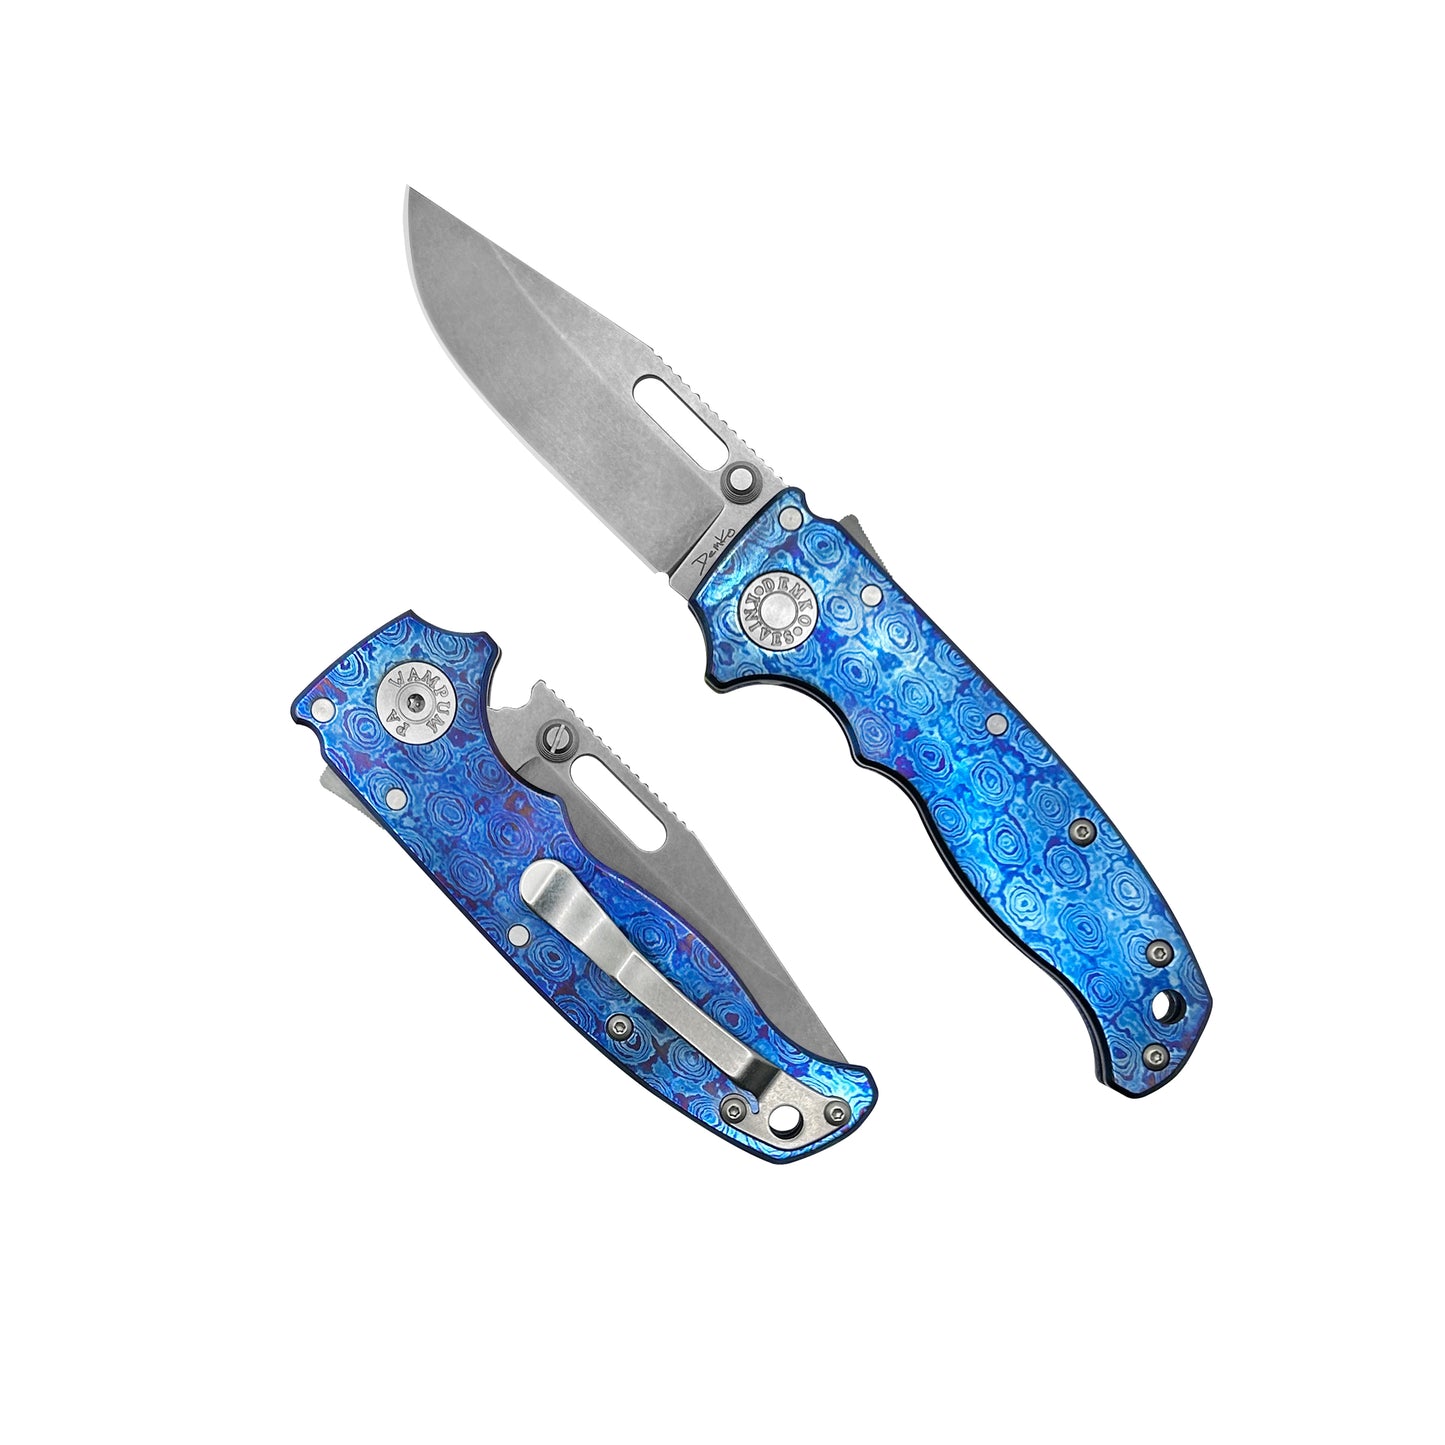 AD20.5 - Clip Point- Timascus - 3V